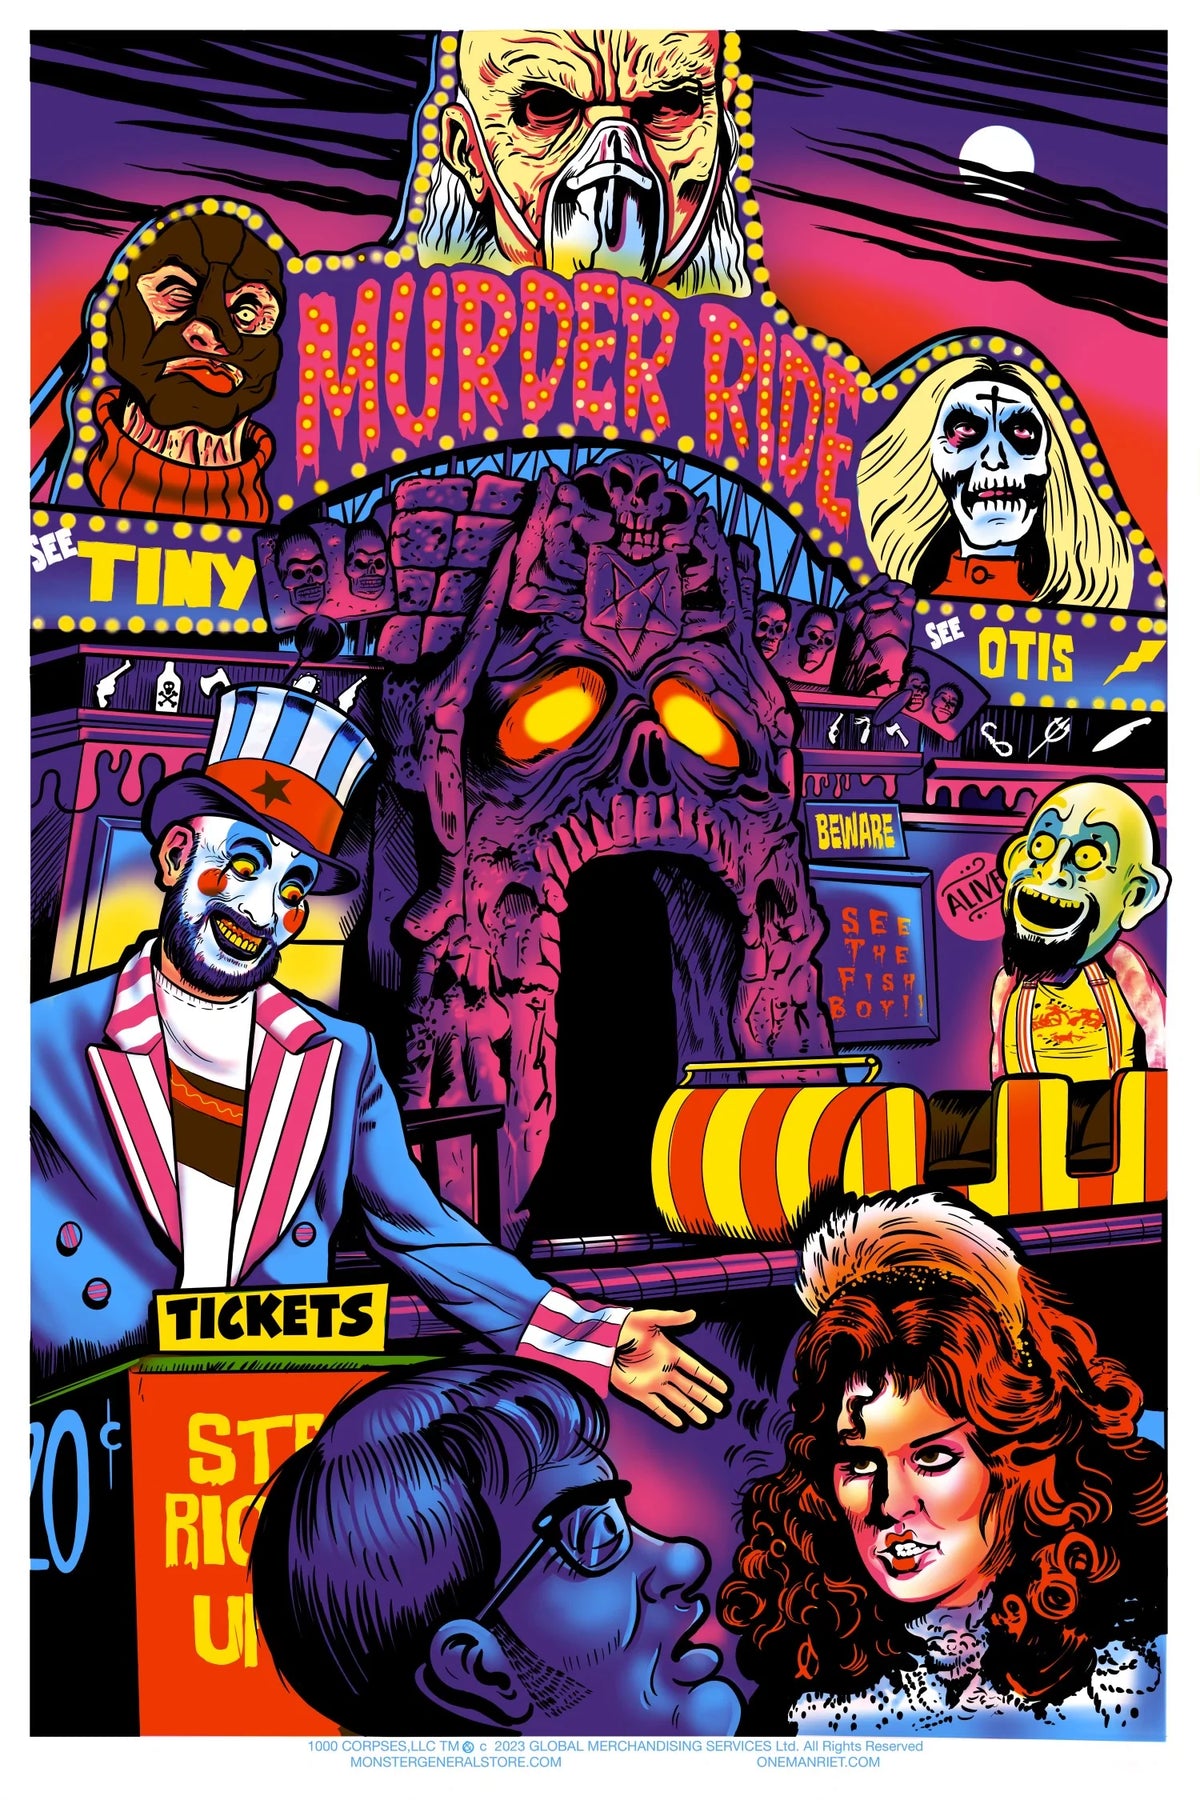 Monster General Store - Rob Zombie: House Of 1000 Corpses Flocked Black Light Poster